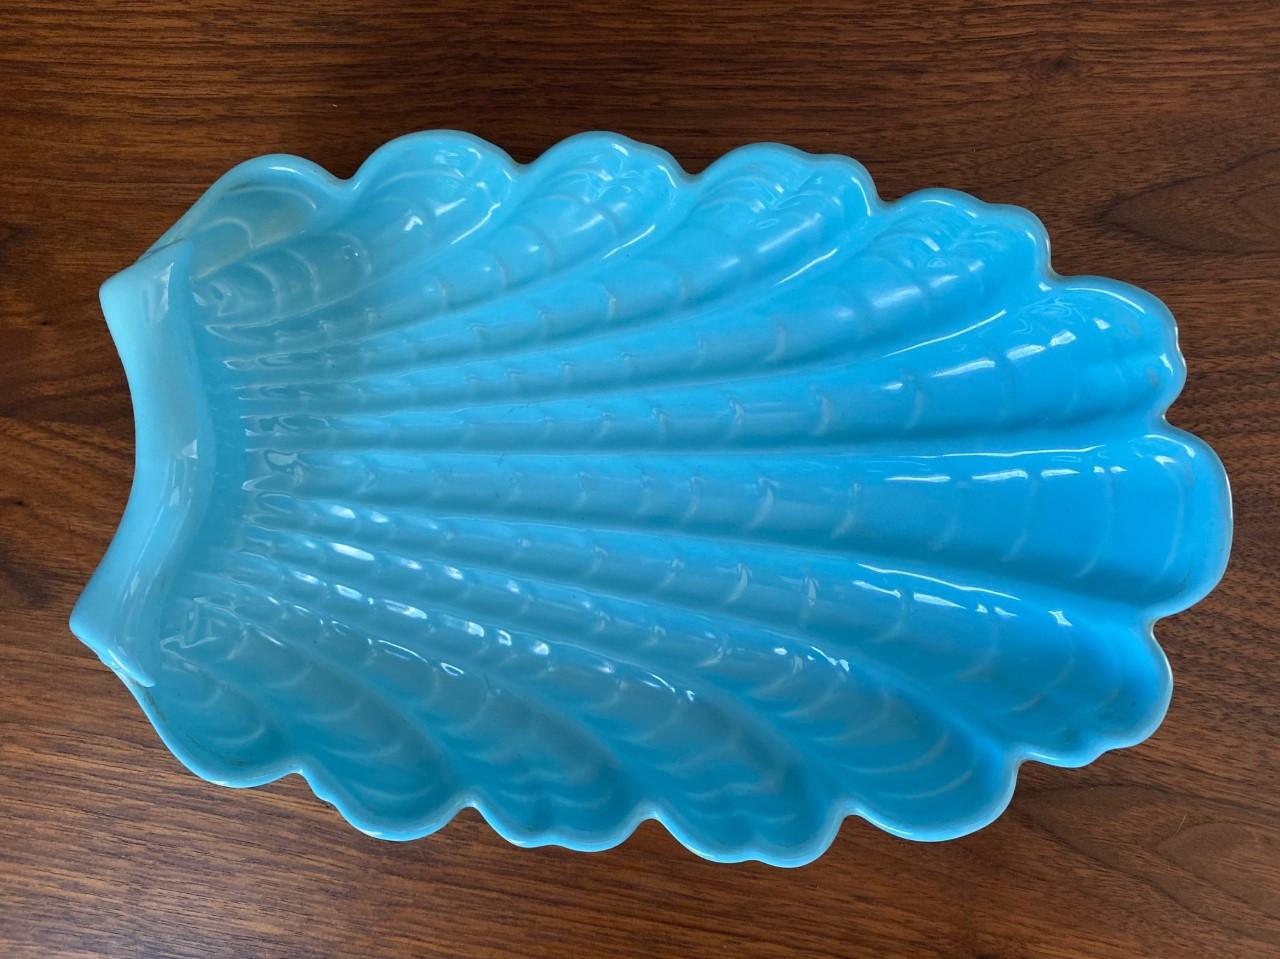 Beautiful and unique antique pastel blue colored decorative tray/dish. The art deco shell-like pattern makes this piece a centerpiece in itself. Great condition. Great addition to your art deco or eclectic décor style.